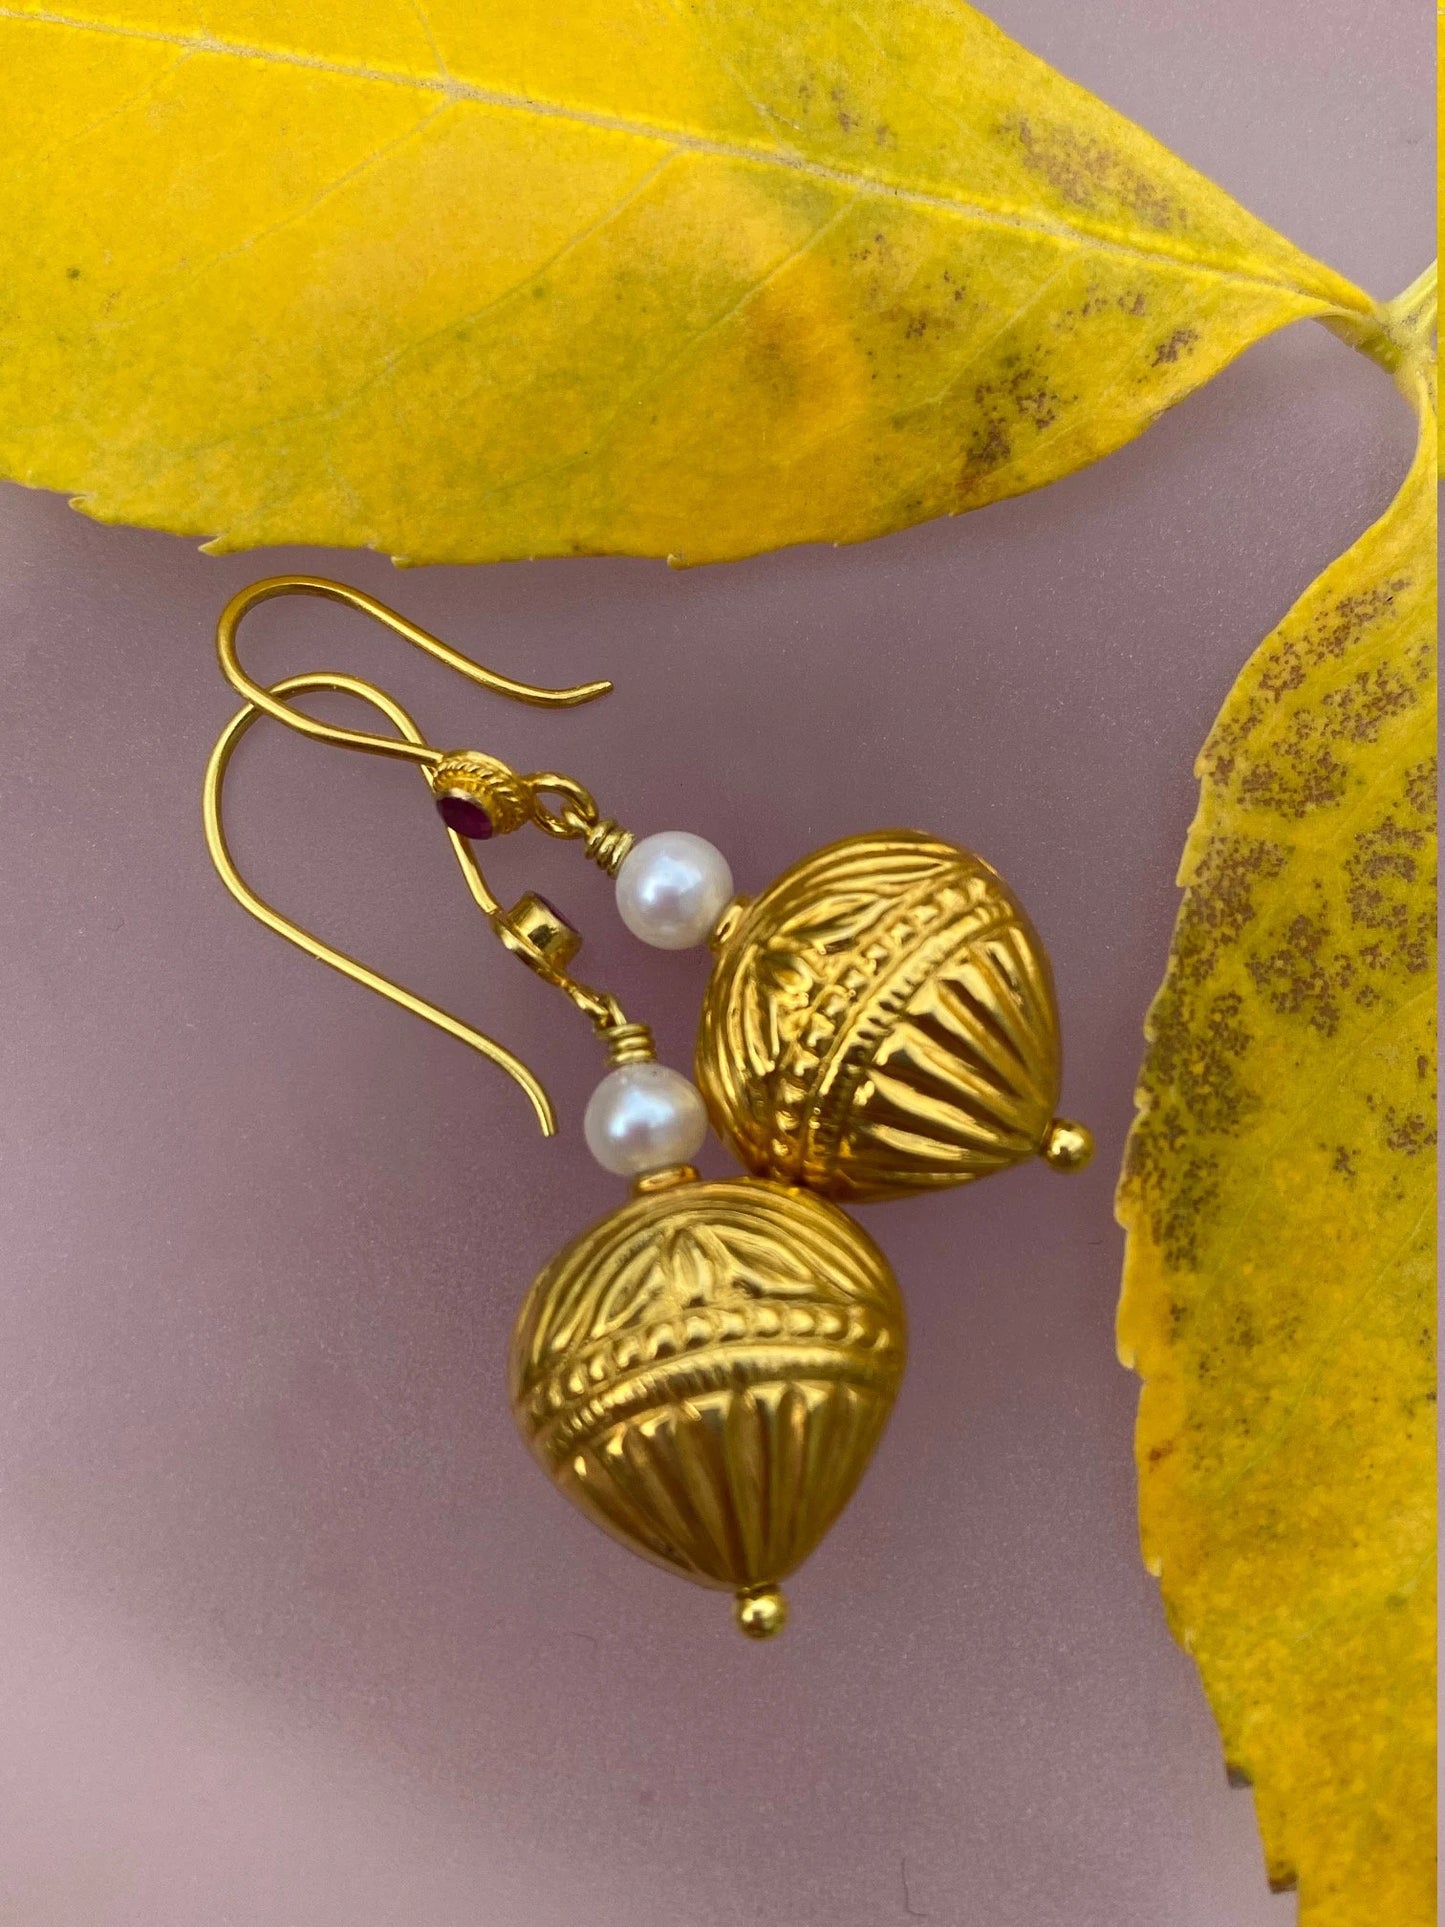 18KY gold earrings with natural round ruby accents and pearls